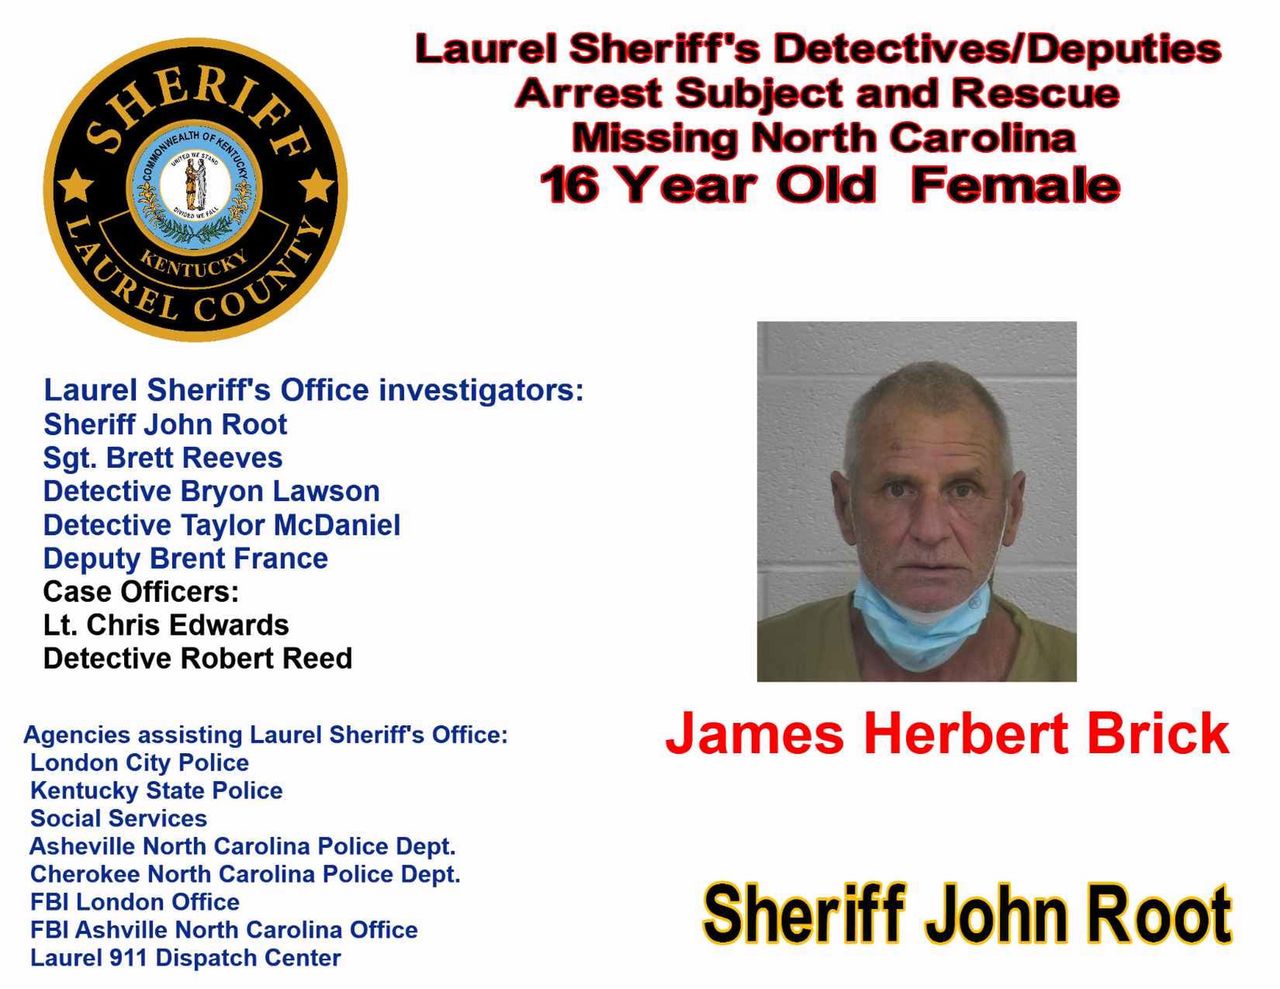 Laurel County Sheriff's Office/facebook